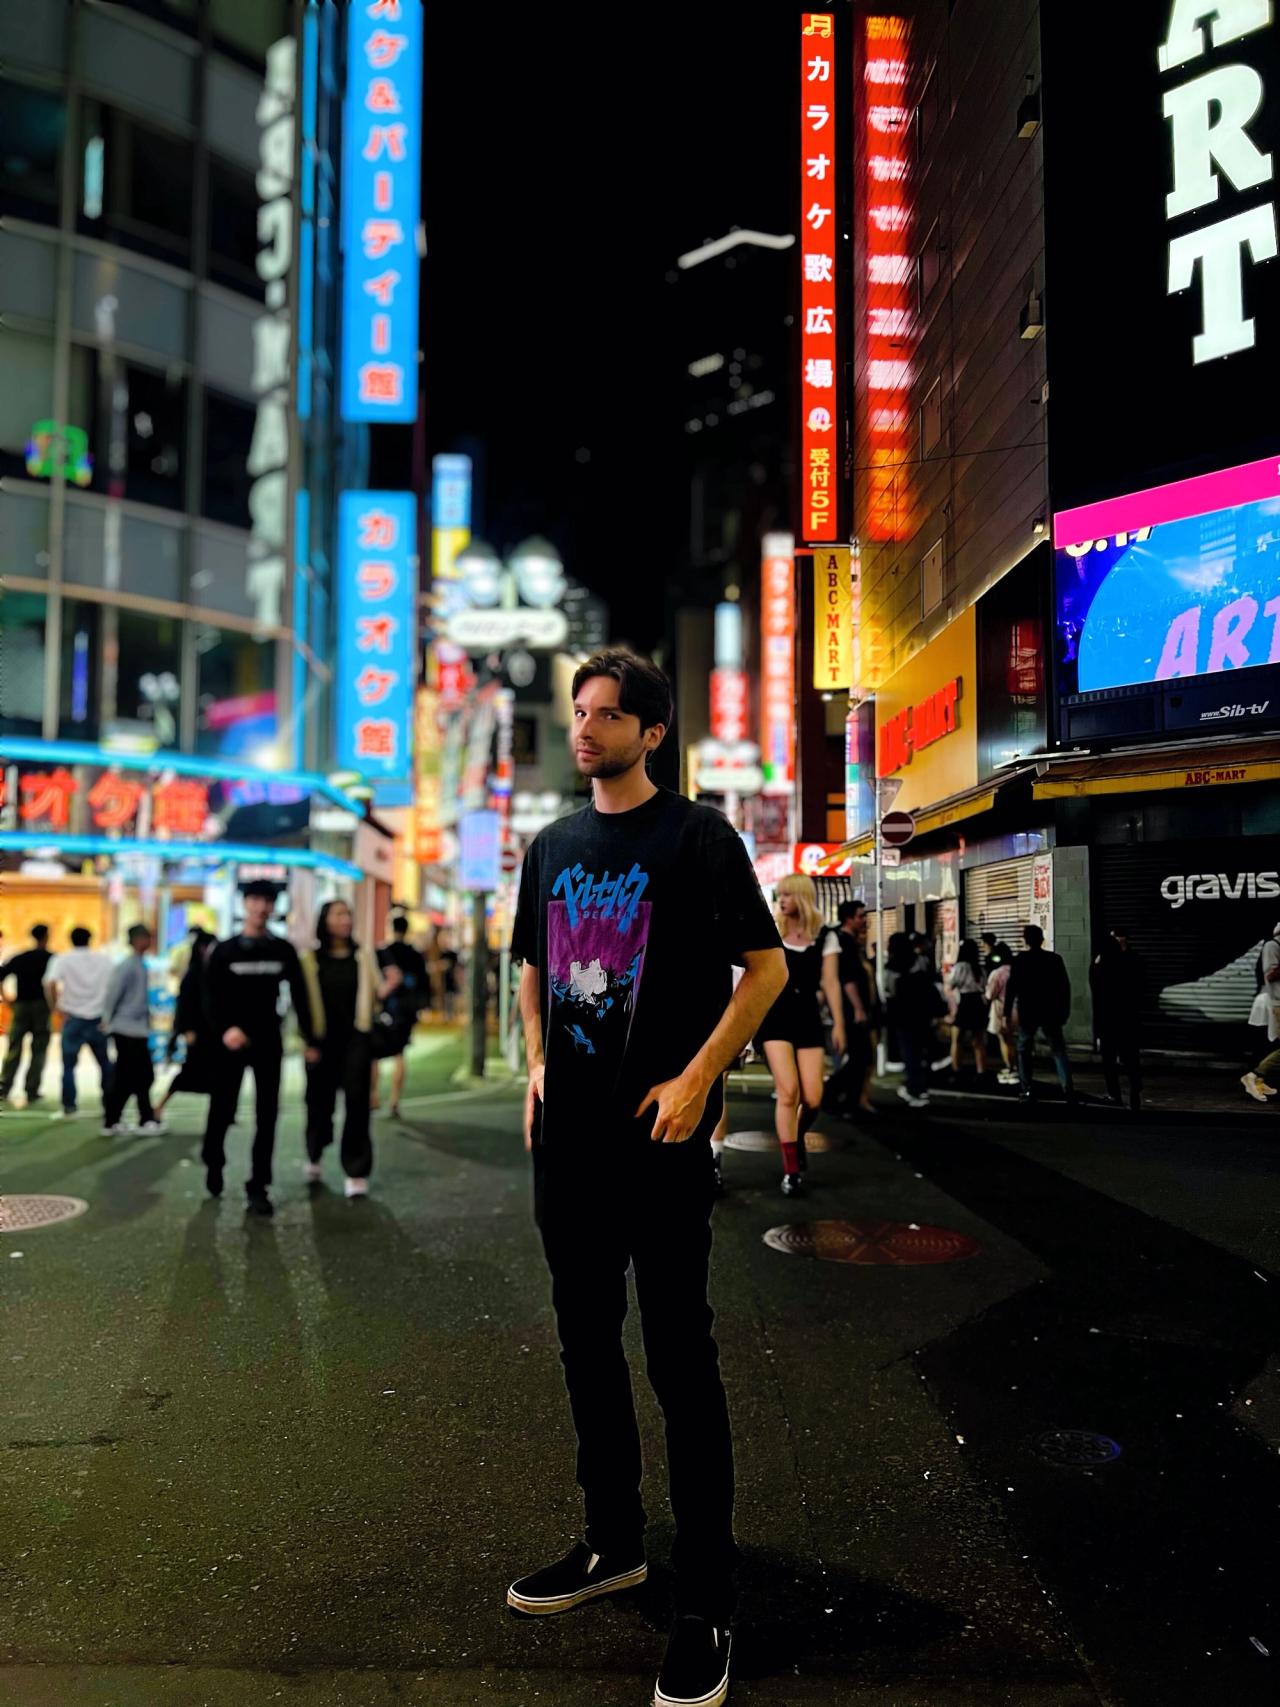 Nick joined as an Assistant Editor. In his personal time, he created and streamed video game content, amassing millions of views. We promoted him to be our very first TikTok Content Creator.